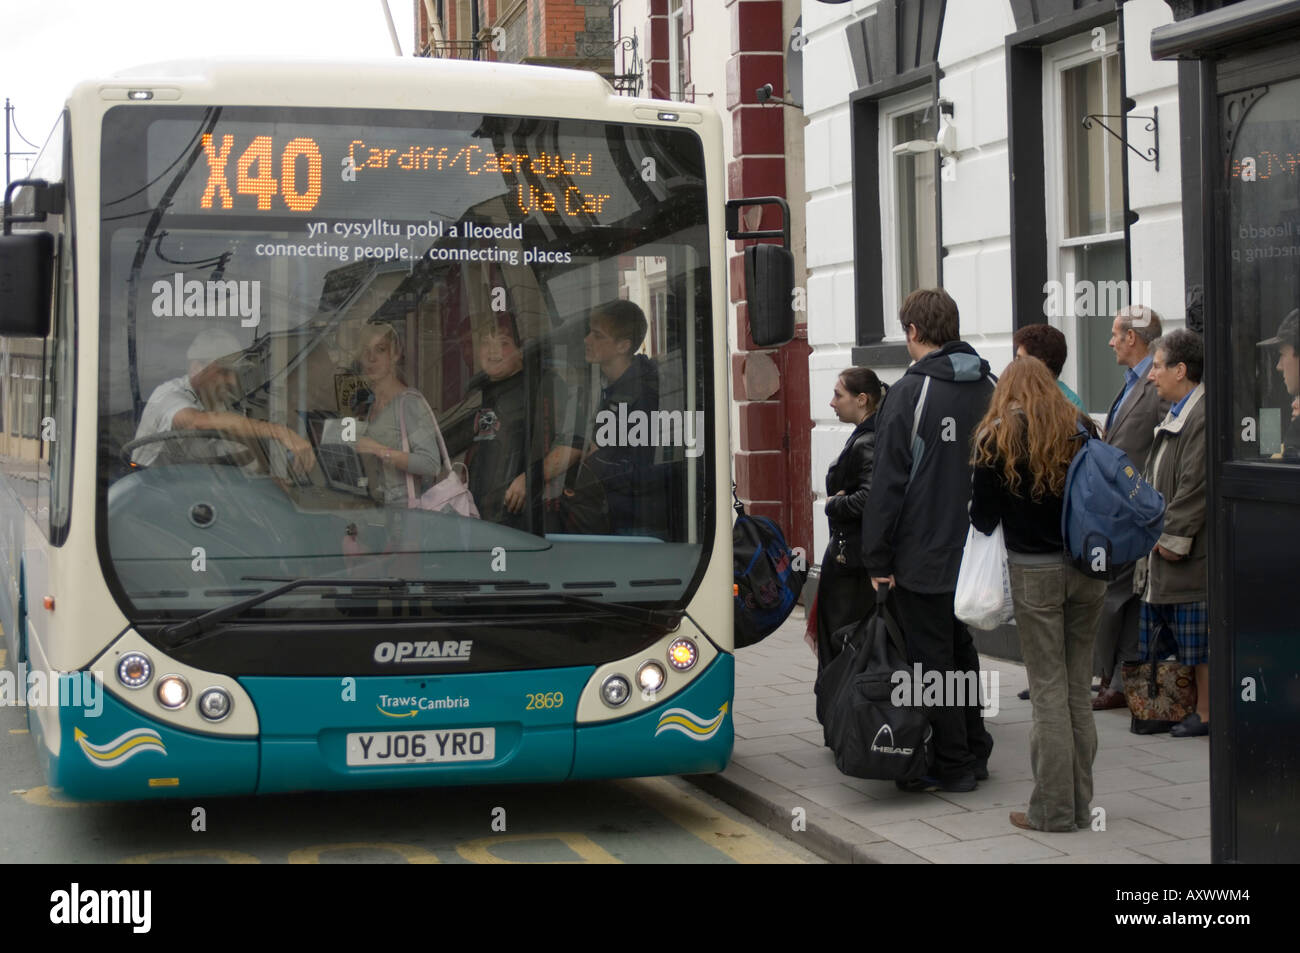 X40 Trawscambria Bus nach Cardiff Abholer in Lampeter Ceredigion Wales UK Stockfoto